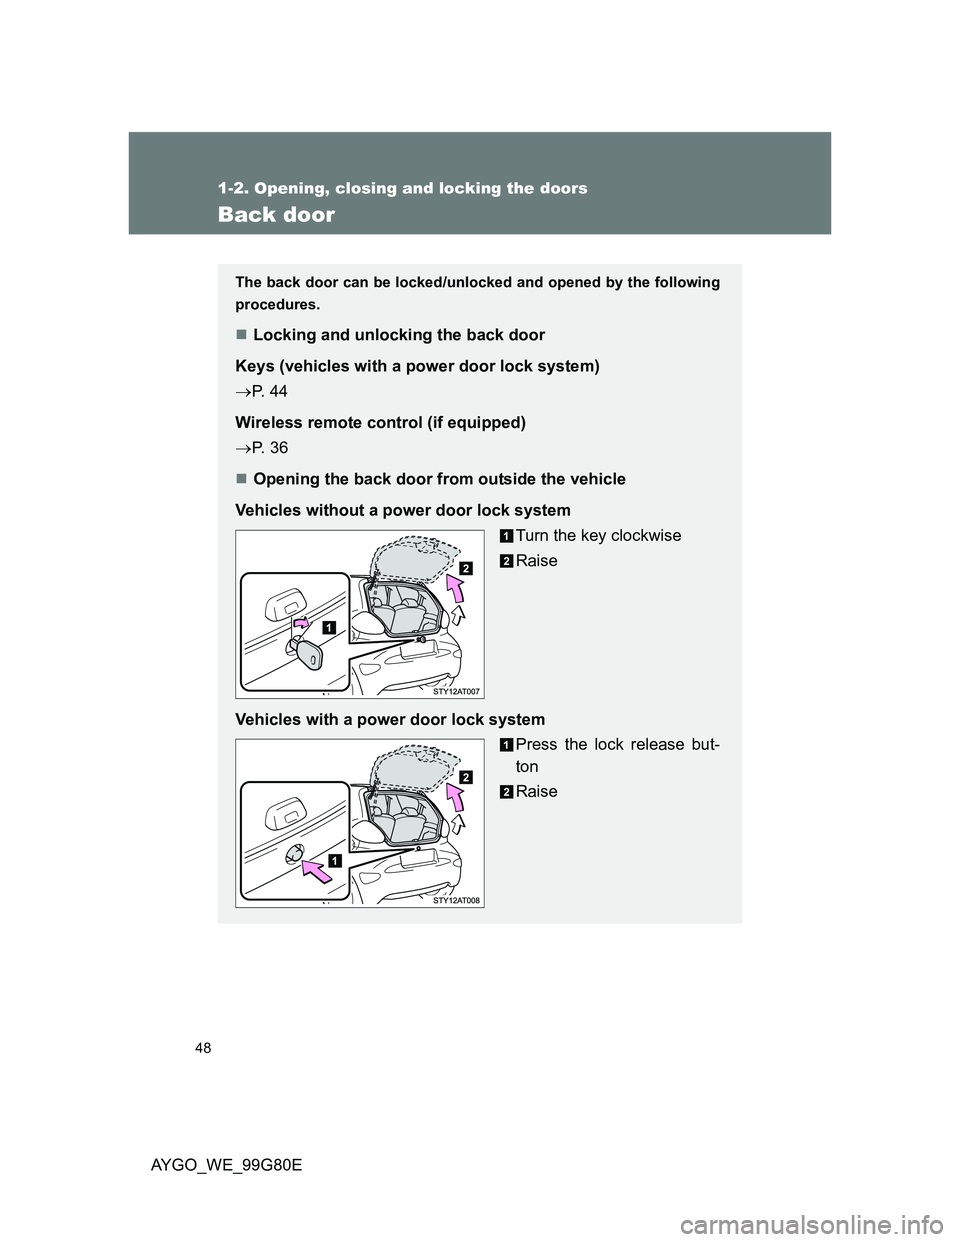 TOYOTA AYGO 2014  Owners Manual (in English) 48
1-2. Opening, closing and locking the doors
AYGO_WE_99G80E
Back door
The back door can be locked/unlocked and opened by the following
procedures.
Locking and unlocking the back door
Keys (vehicl